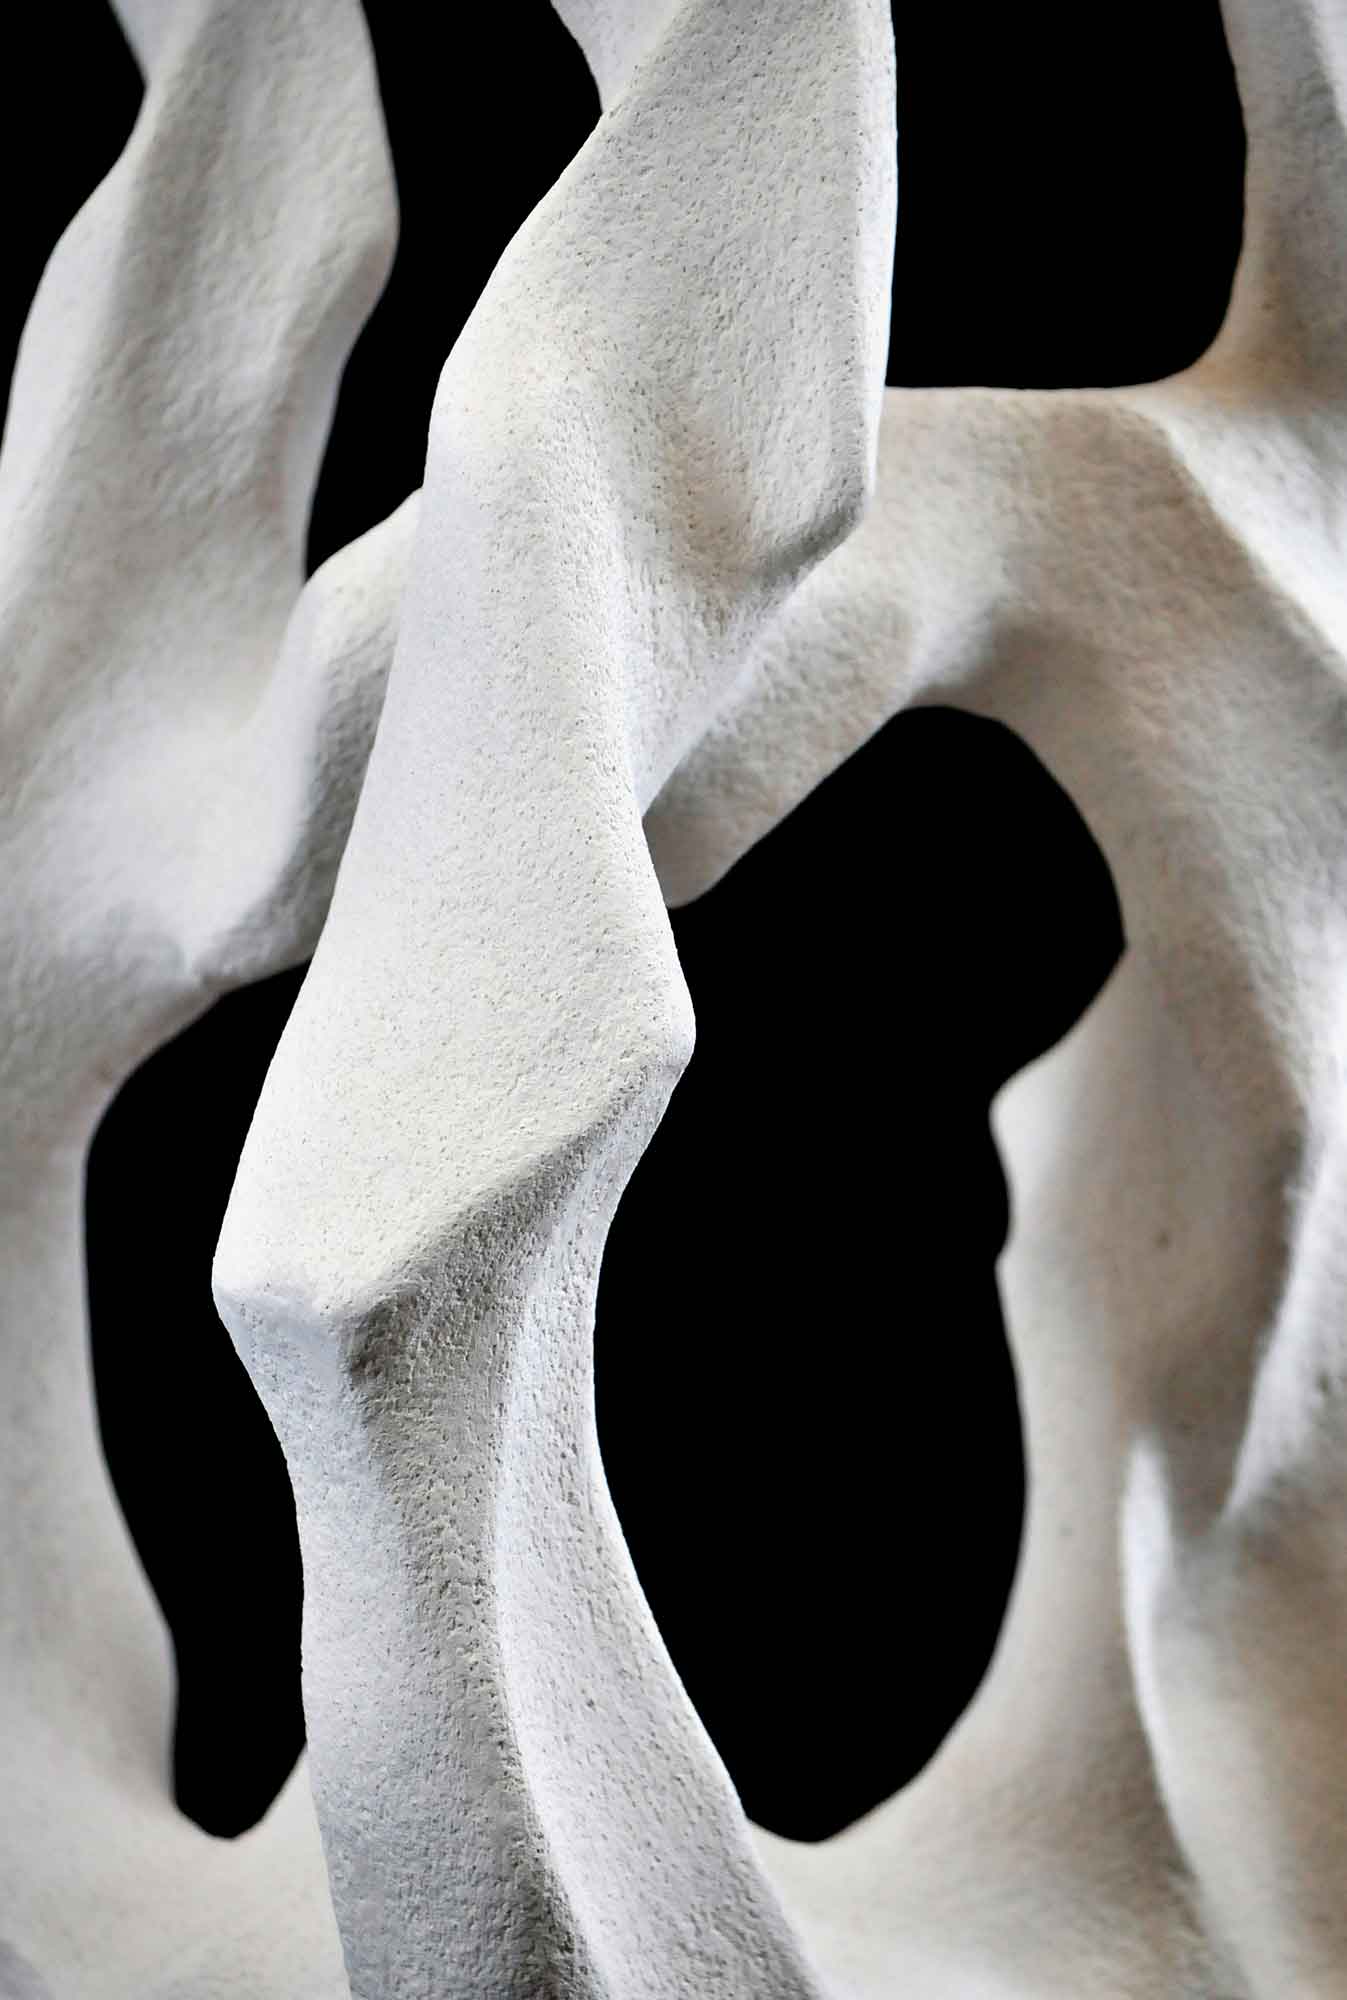 Sculpture of organic forms